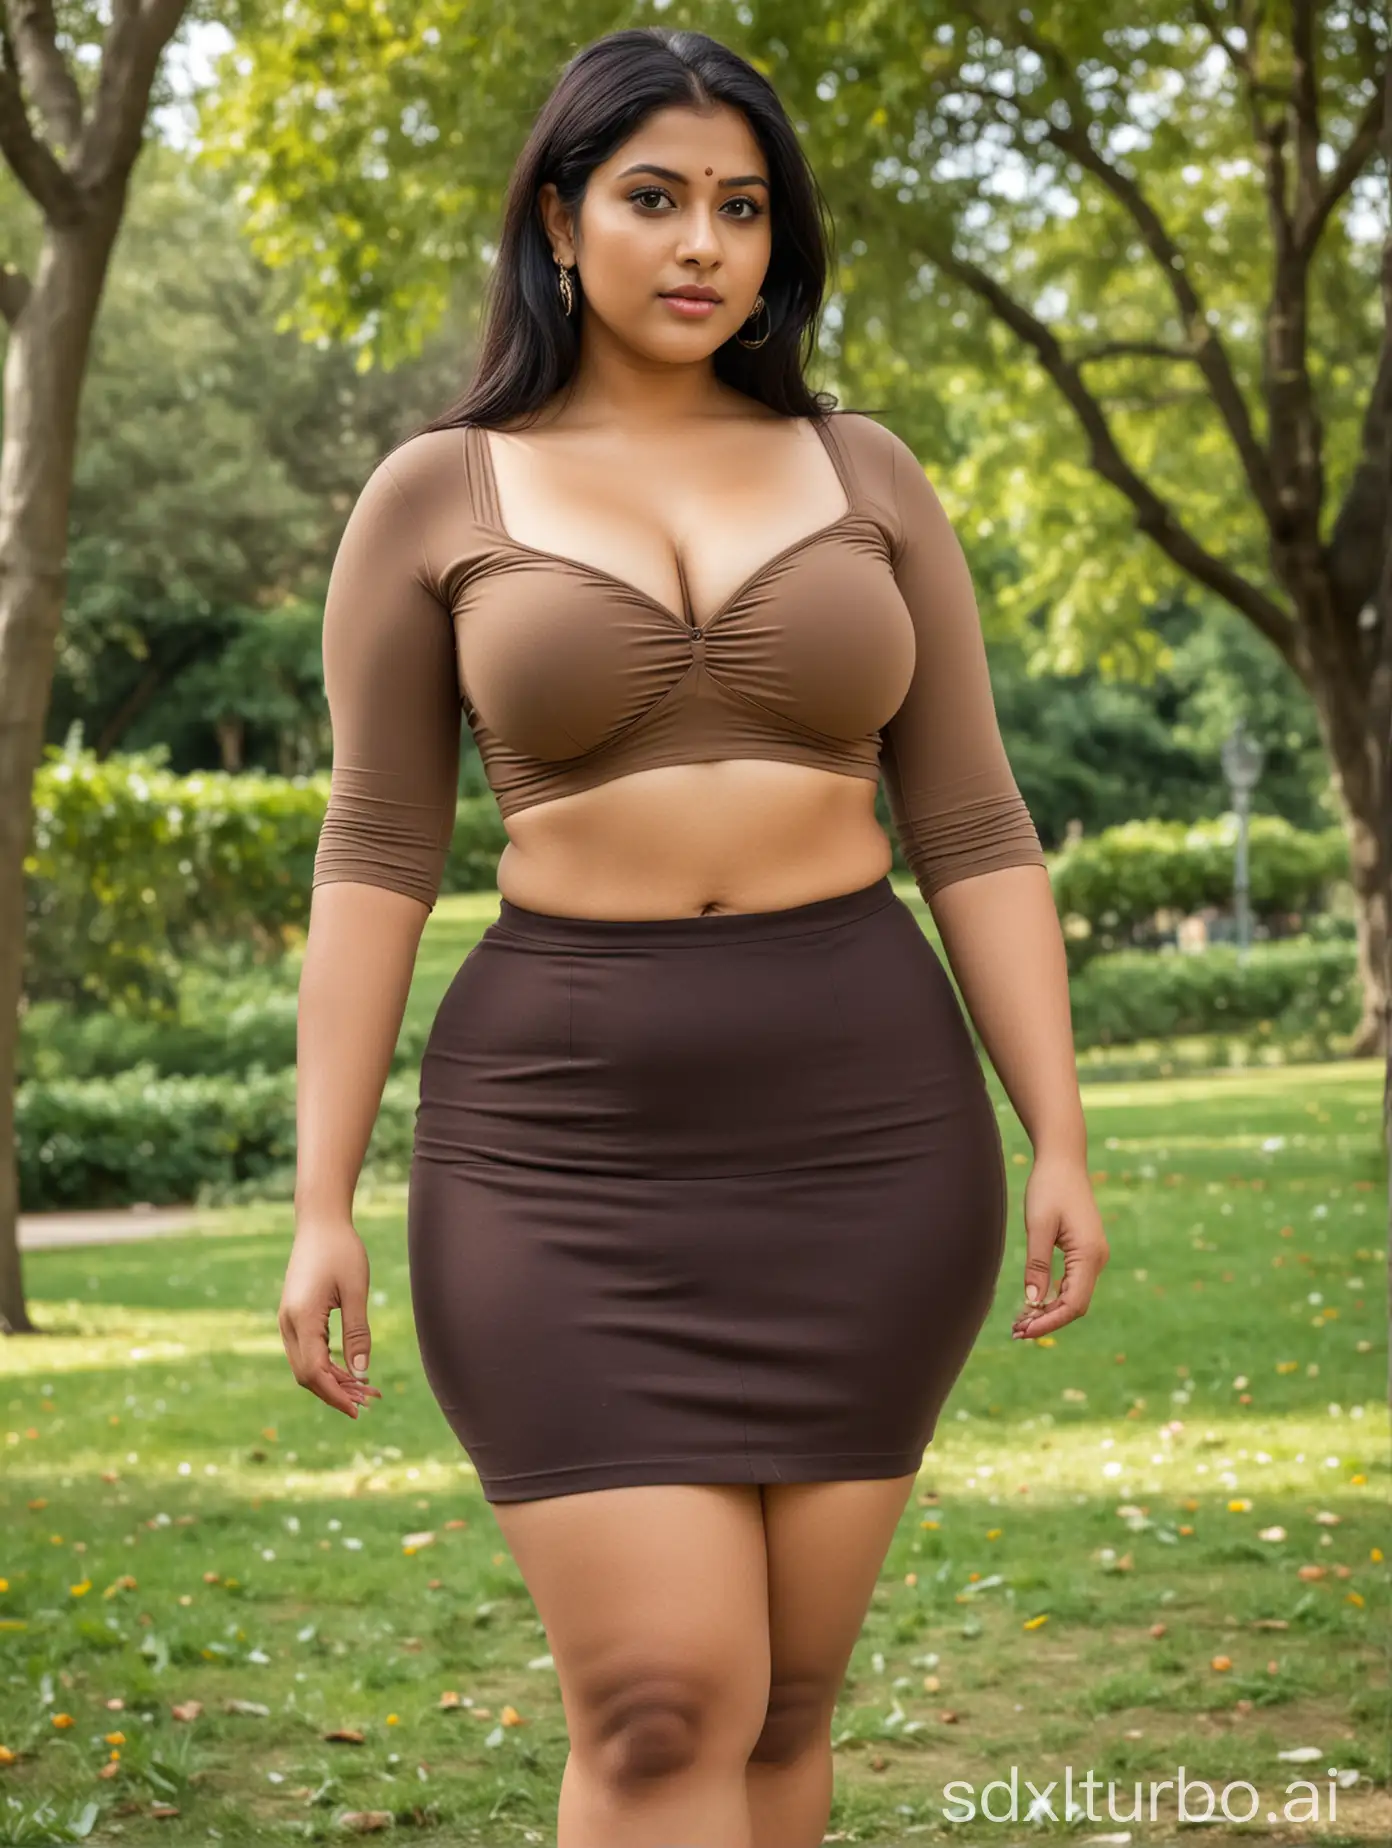 Curvy-Indian-Woman-in-Mocha-Crop-Top-and-Mini-Skirt-Showcasing-Generous-Bosom-in-Crowded-Park